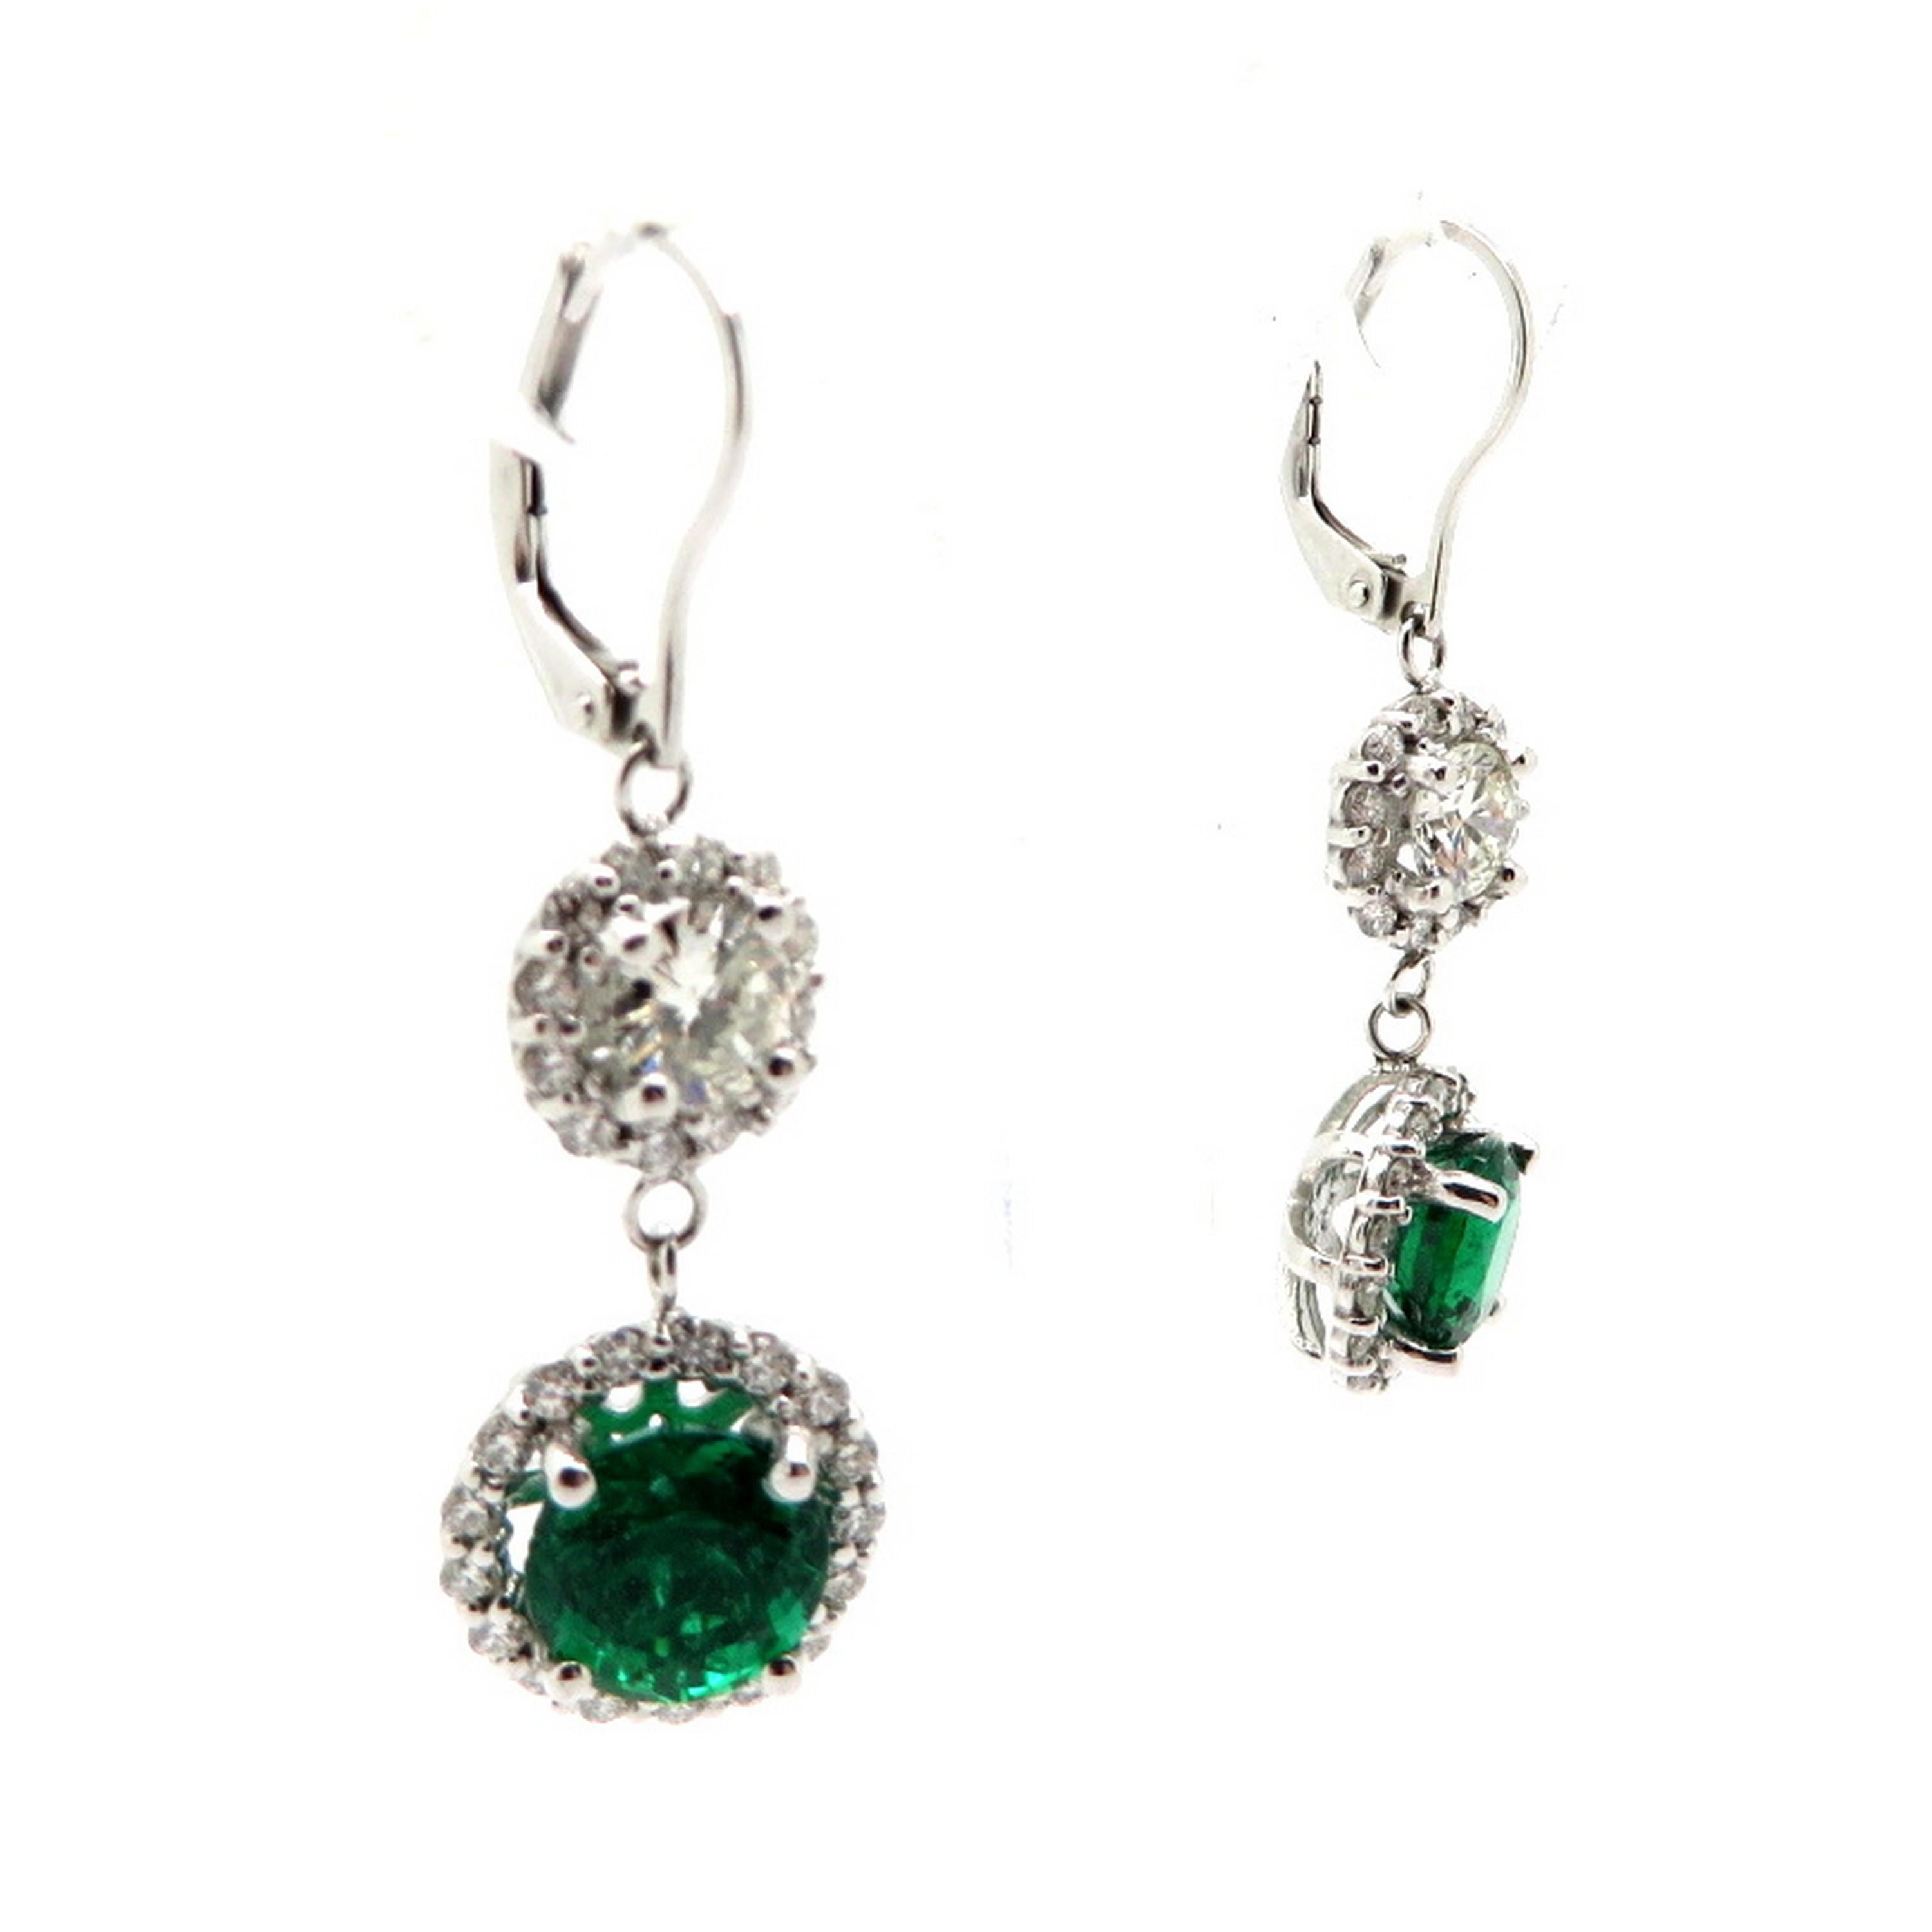 AGL certified Zambian emerald and diamond 14K white gold dangle earrings. Featuring two round brilliant cut AGL certified Zambian emeralds weighing approximately 3.85 carats total. Accented with 60 round brilliant cut prong set diamonds with a halo